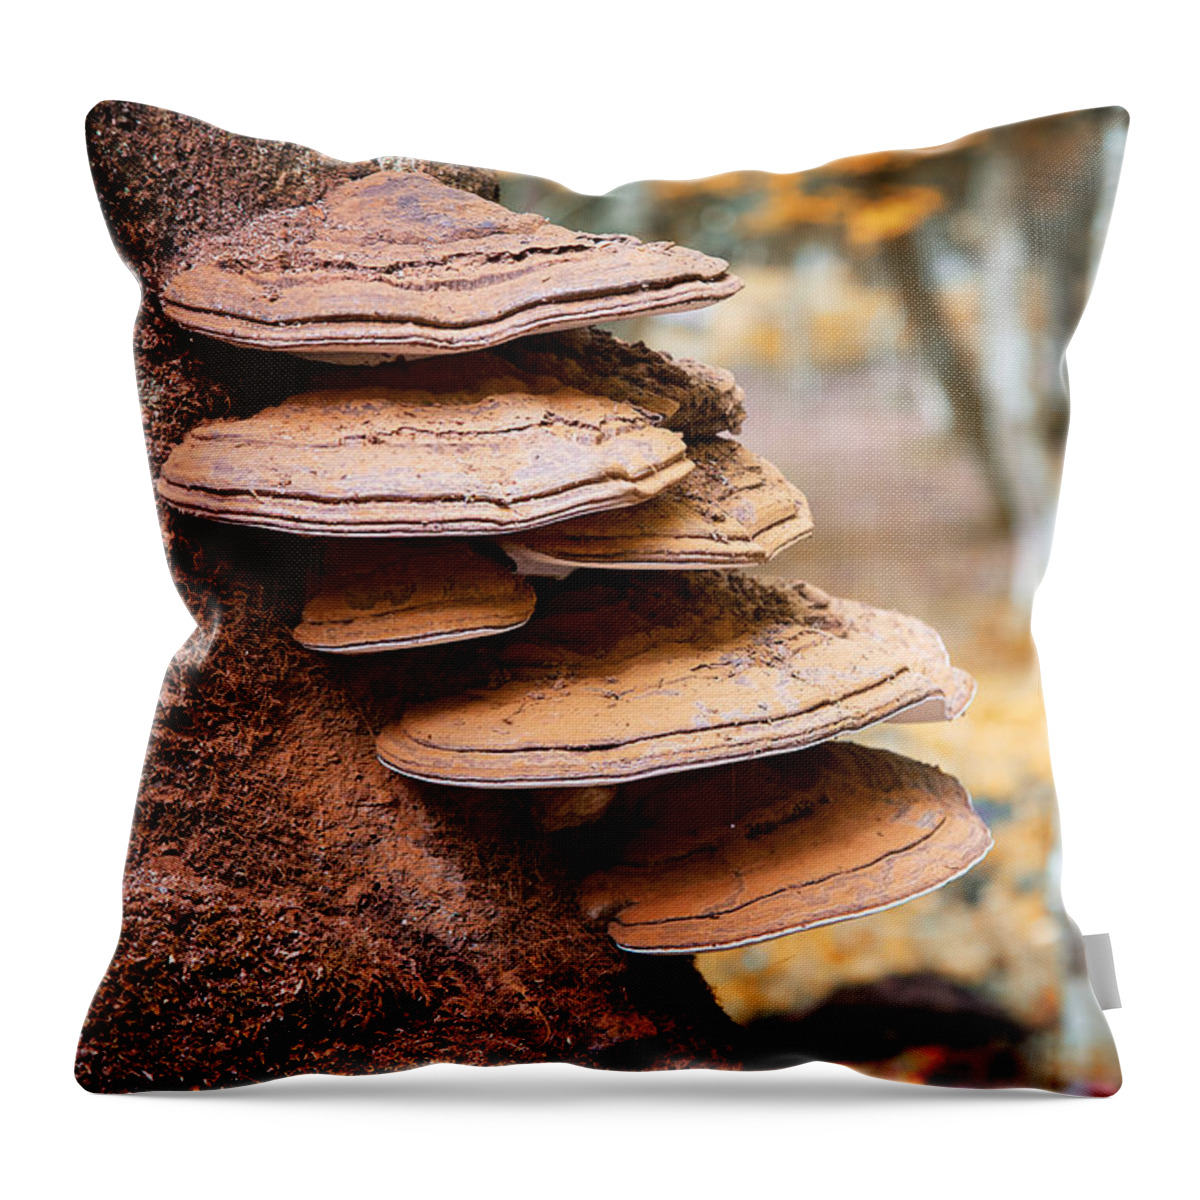 Fungus Throw Pillow featuring the photograph Bracket fungus on beech tree by Jane Rix